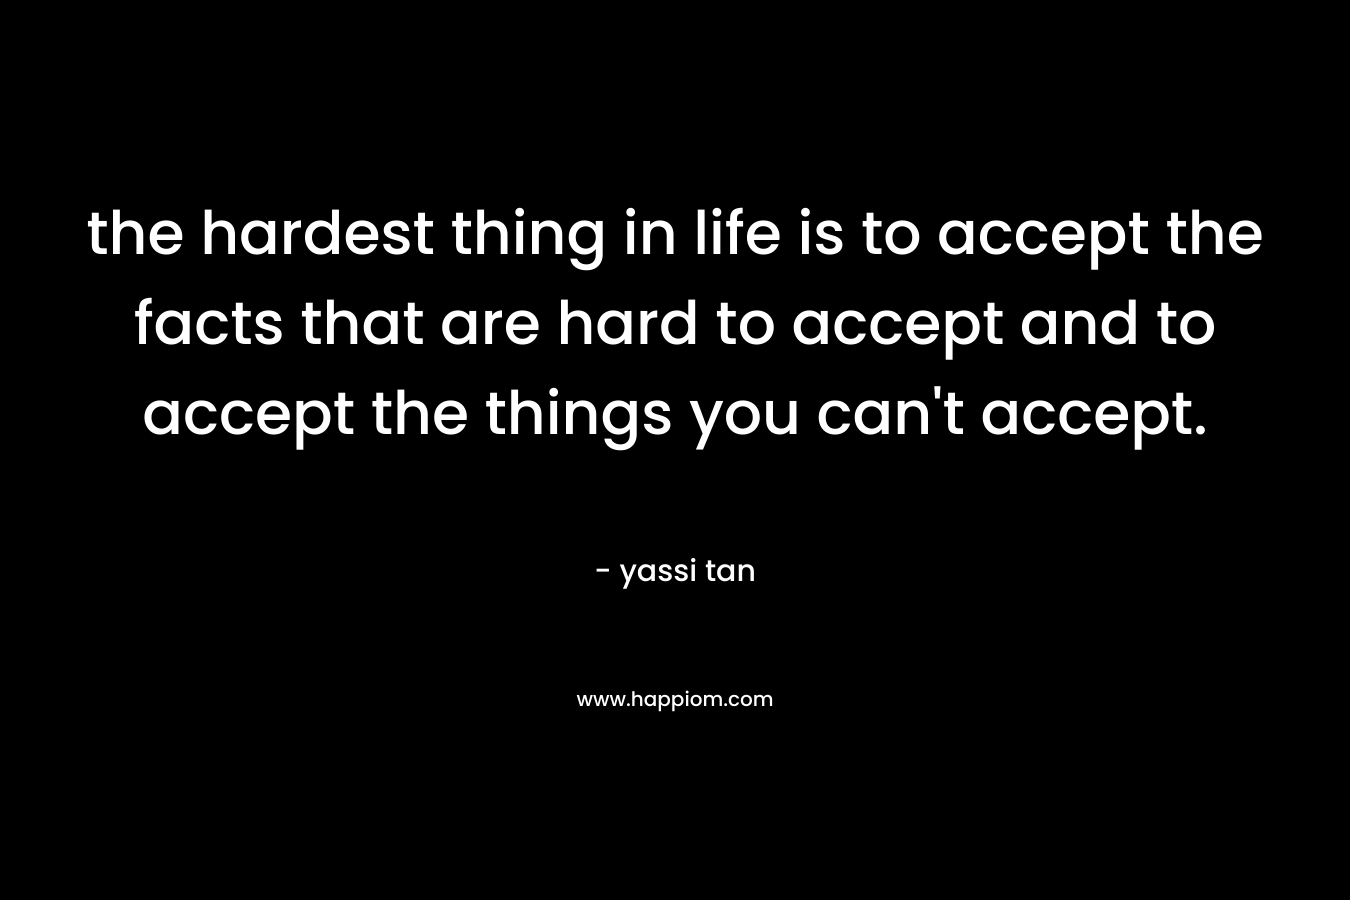 the hardest thing in life is to accept the facts that are hard to accept and to accept the things you can't accept.